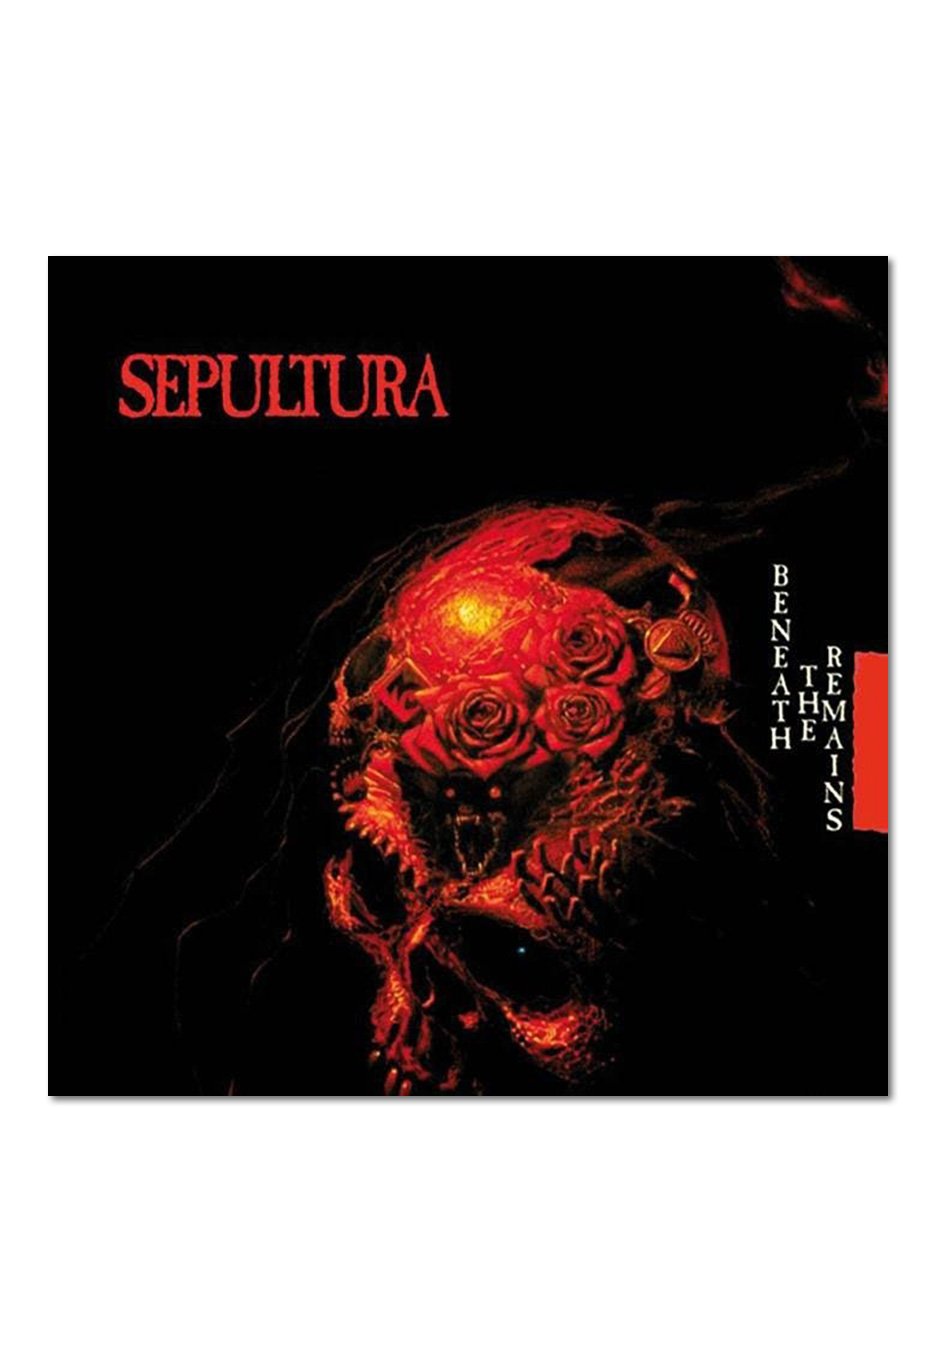 Sepultura - Beneath The Remains Re-Release - CD